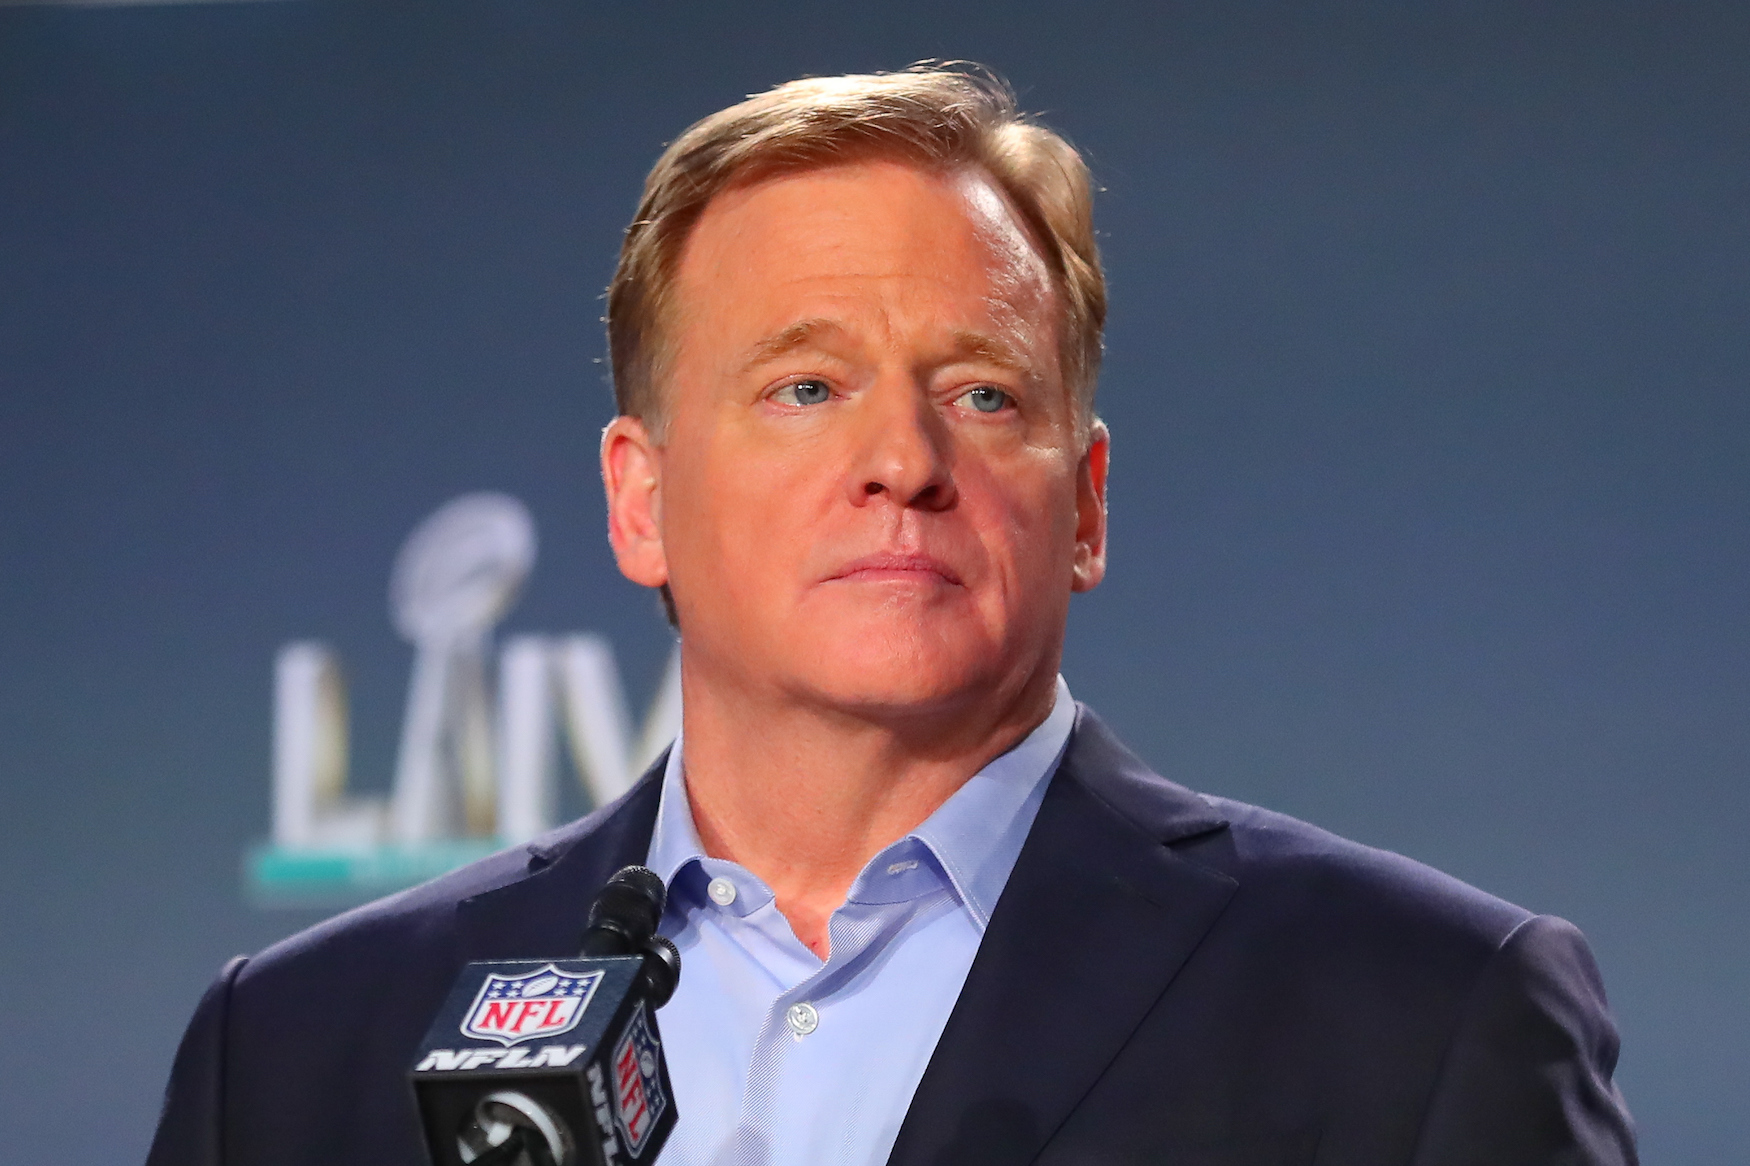 Roger Goodell's open letter never said there would be a "full season" of football this year.